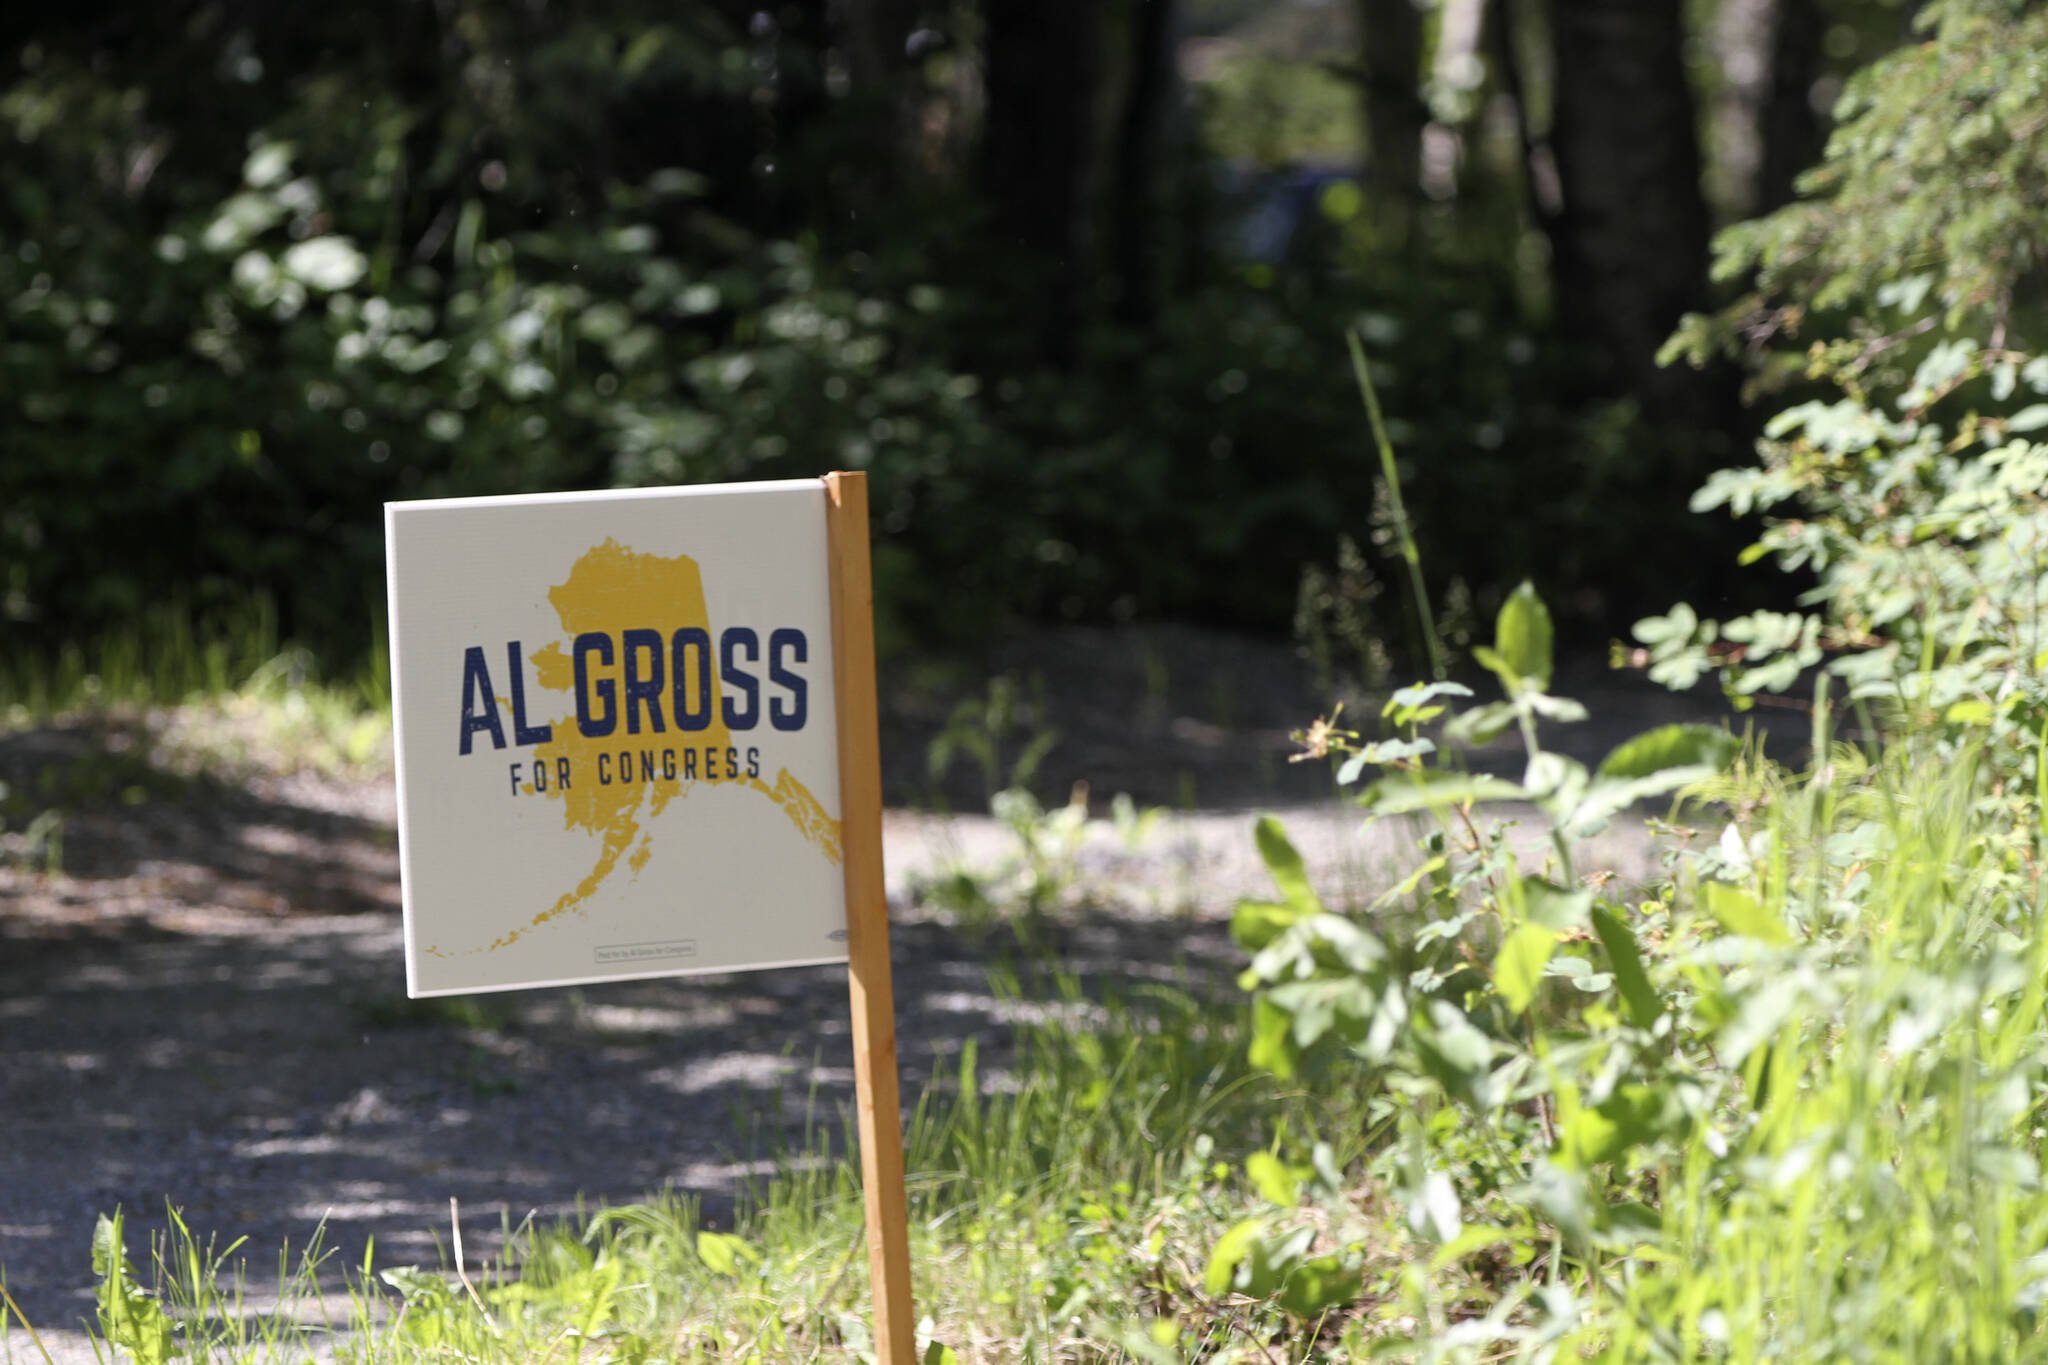 An “Al Gross for Congress” sign sits near the driveway to Gross’ home in Anchorage, Alaska, on Tuesday, June 21, 2022, after he announced plans to withdraw from the U.S. House race. Gross has given little explanation in two statements for why he is ending his campaign, and a woman who answered the door at the Gross home asked a reporter to leave the property. (AP Photo/Mark Thiessen)